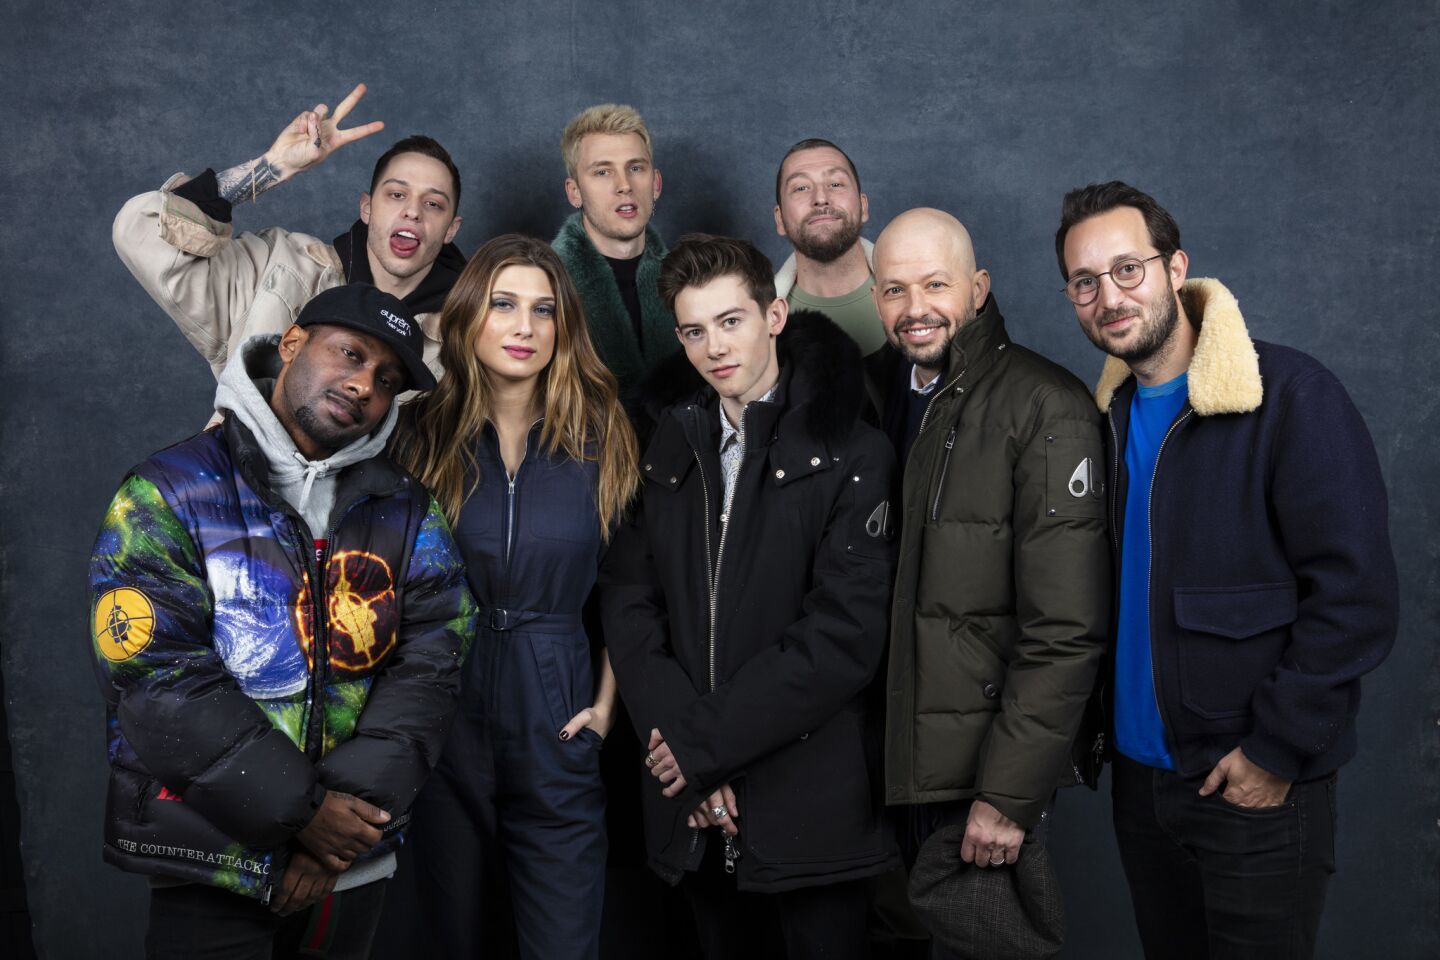 Actor Jordan Rock, actor Pete Davidson, actor Colson Baker, actor Griffin Gluck, Joey Gay, writer/director Jason Orley, actor Jon Cryer and actor Emily Arlook from the film "Big Time Adolescence."